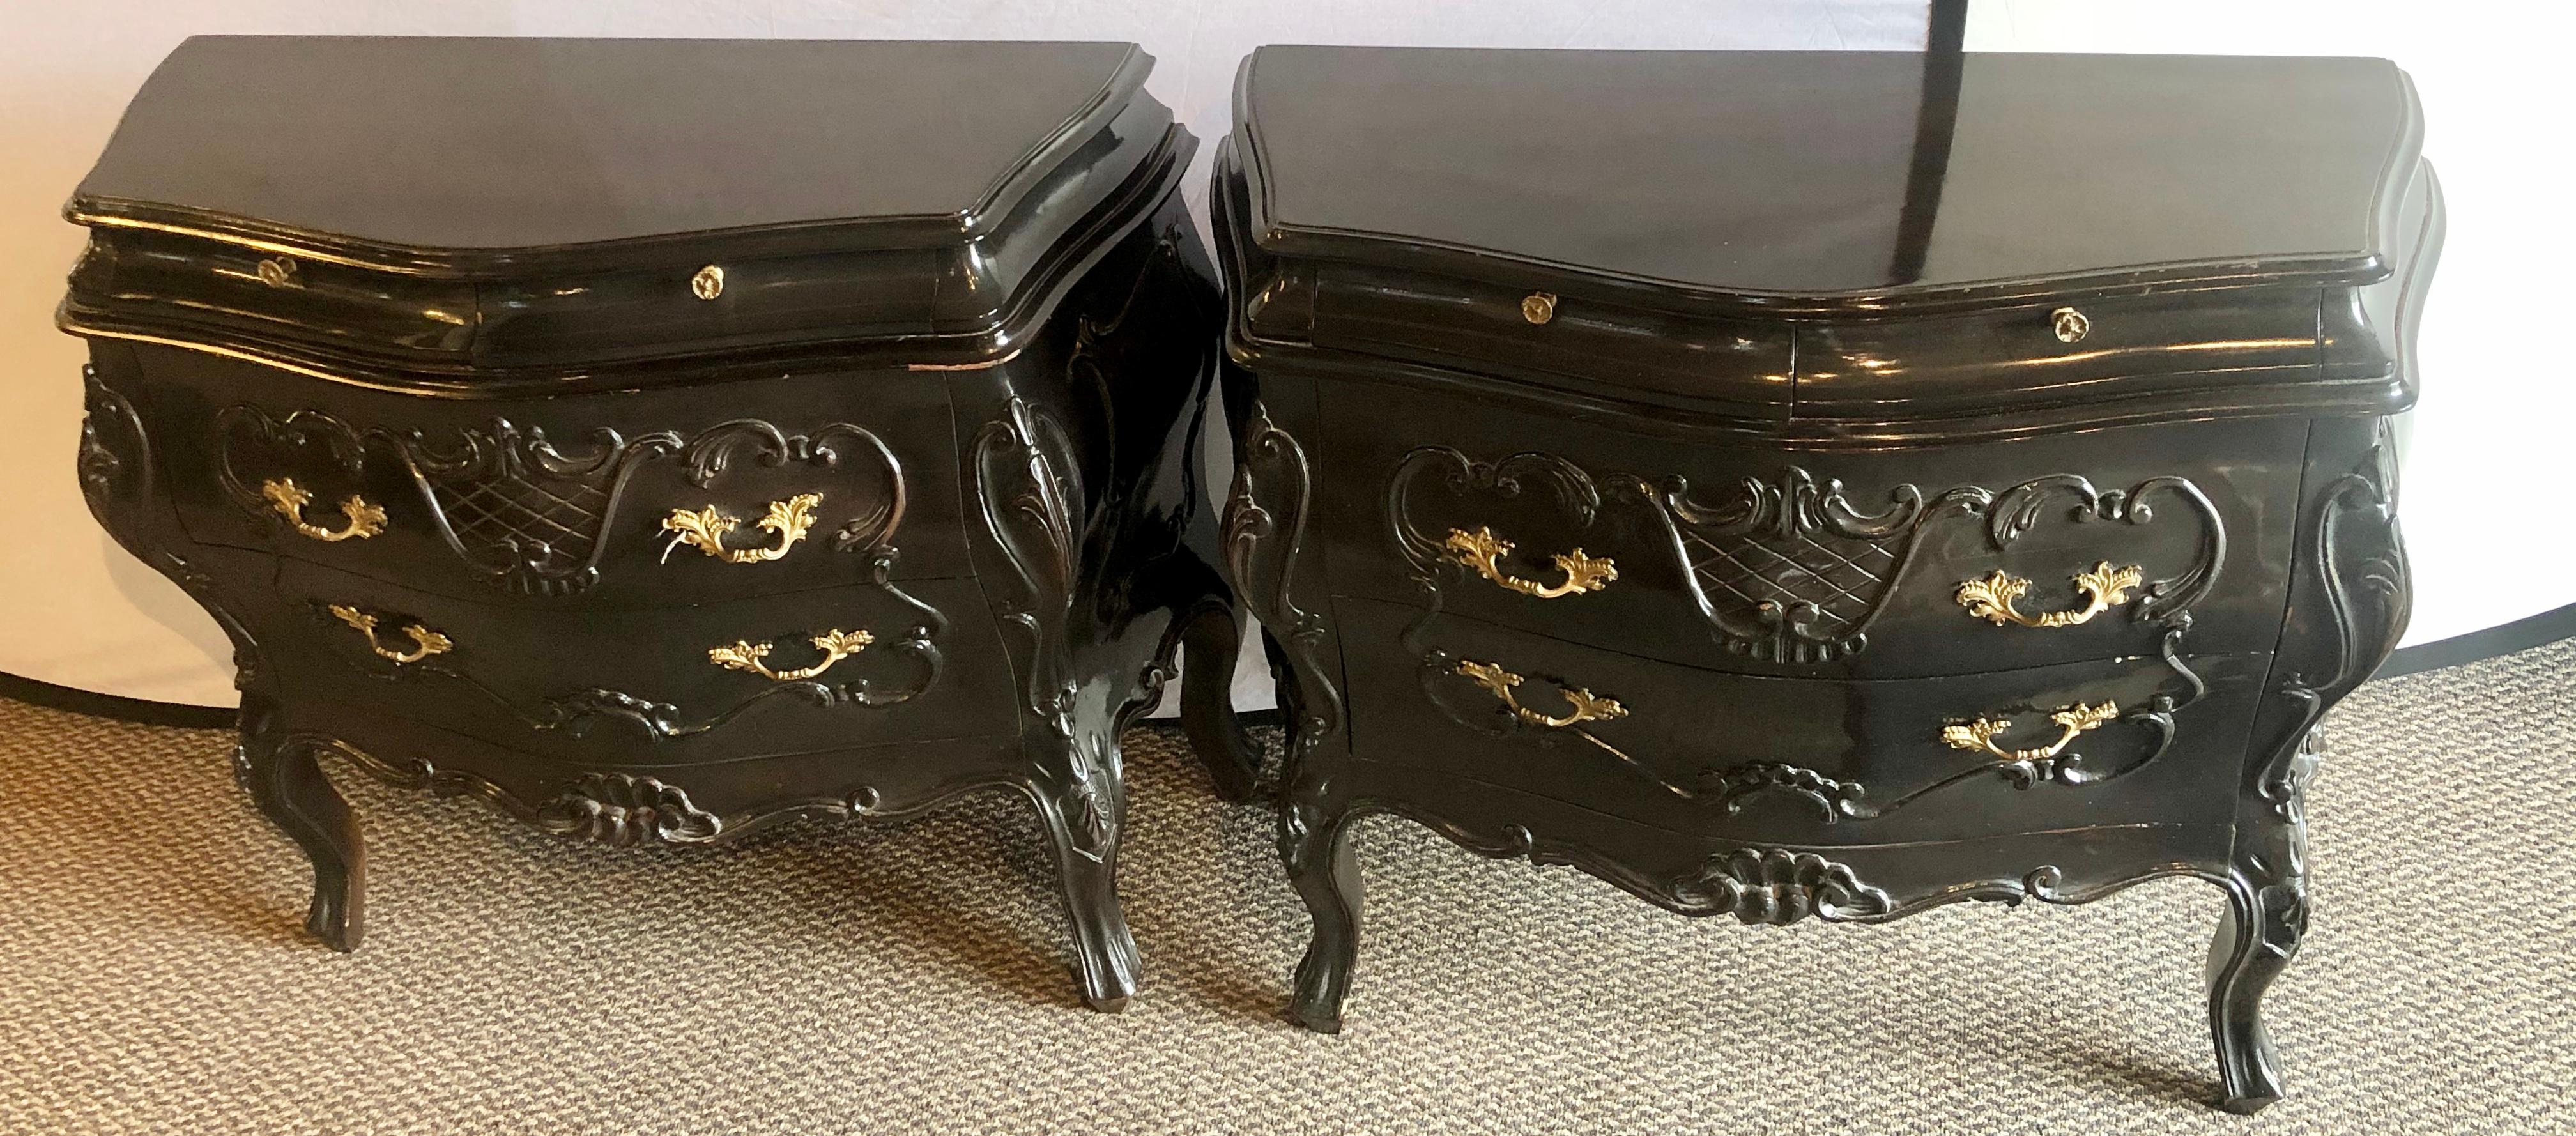 Pair of Bombay ebonized nightstands or end tables. These stunning and finely finished Louis XV style commodes or nightstands have a Bombay form and are carved in an all ebony finish. This pair are sure to make a stunning addition to any Hollywood